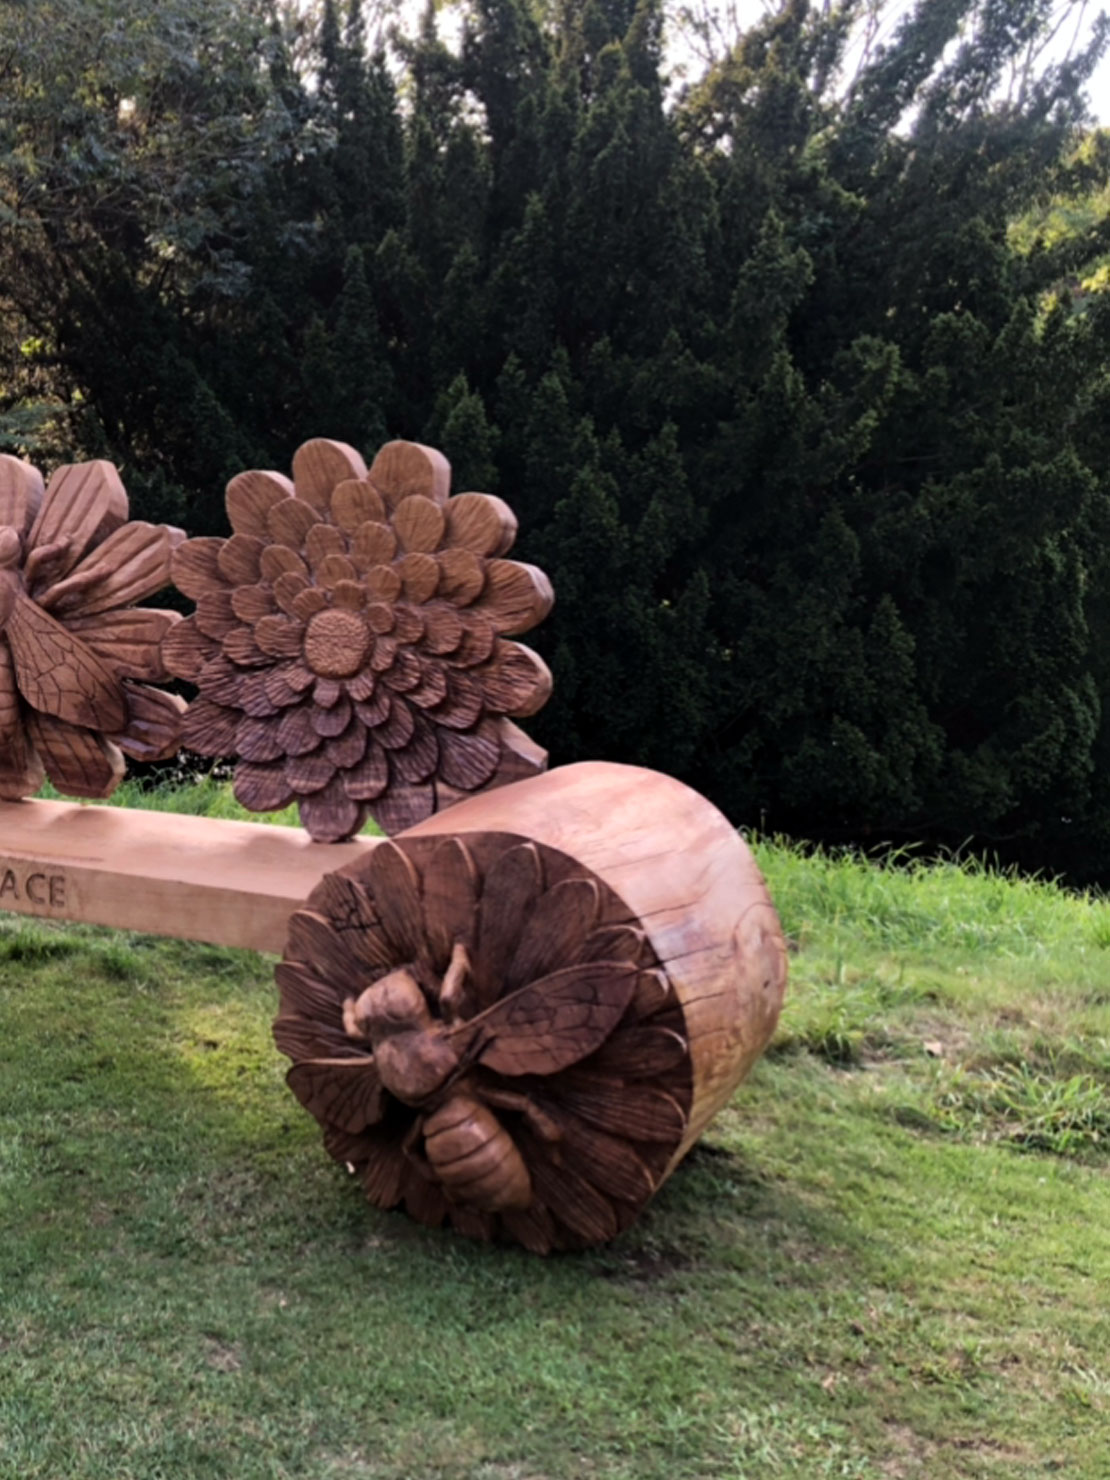 Bee bench at Blenheim Palace